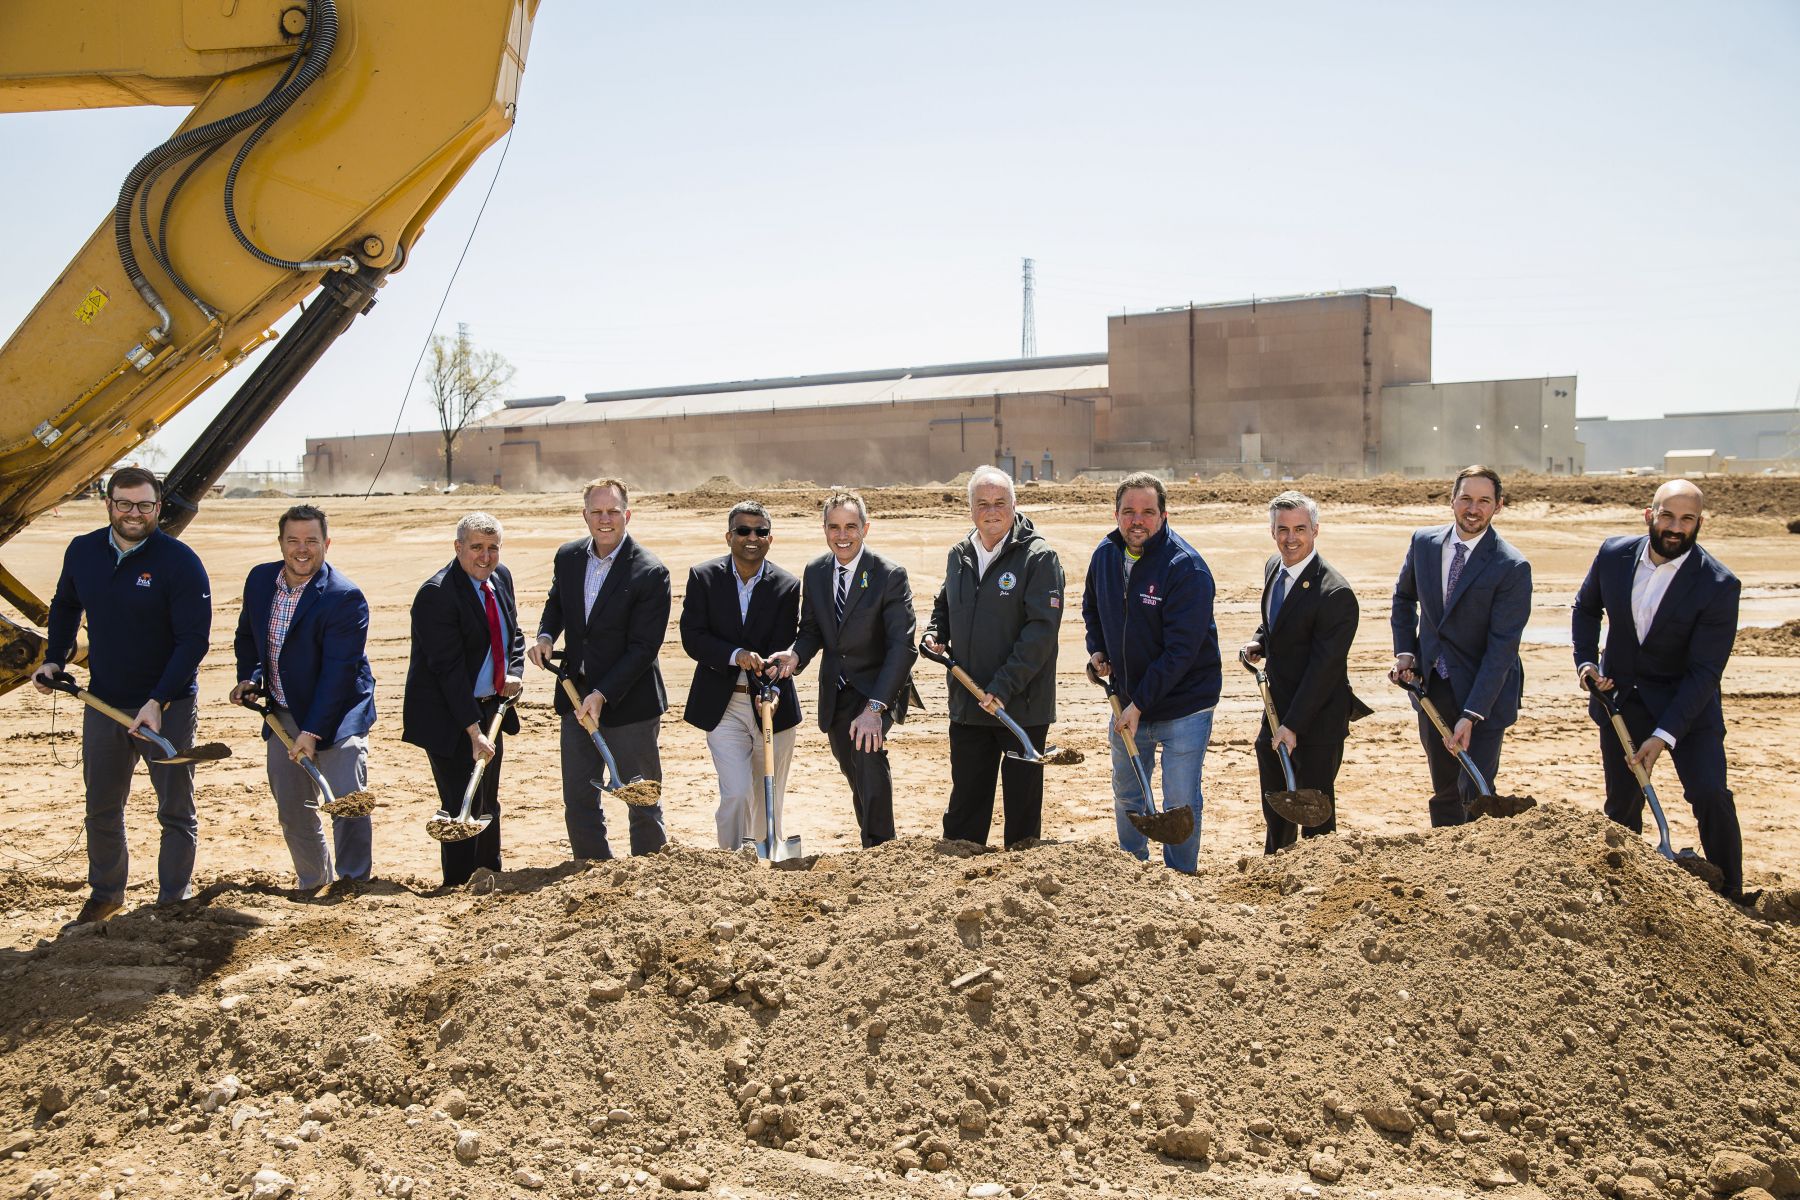 April 28, 2022: Sen. Santarsiero participated in the groundbreaking at NorthPoint Development, a 2,000-acre economic reimagining of the former U.S. Steel Fairless Hills Works in Falls Township, Bucks County.